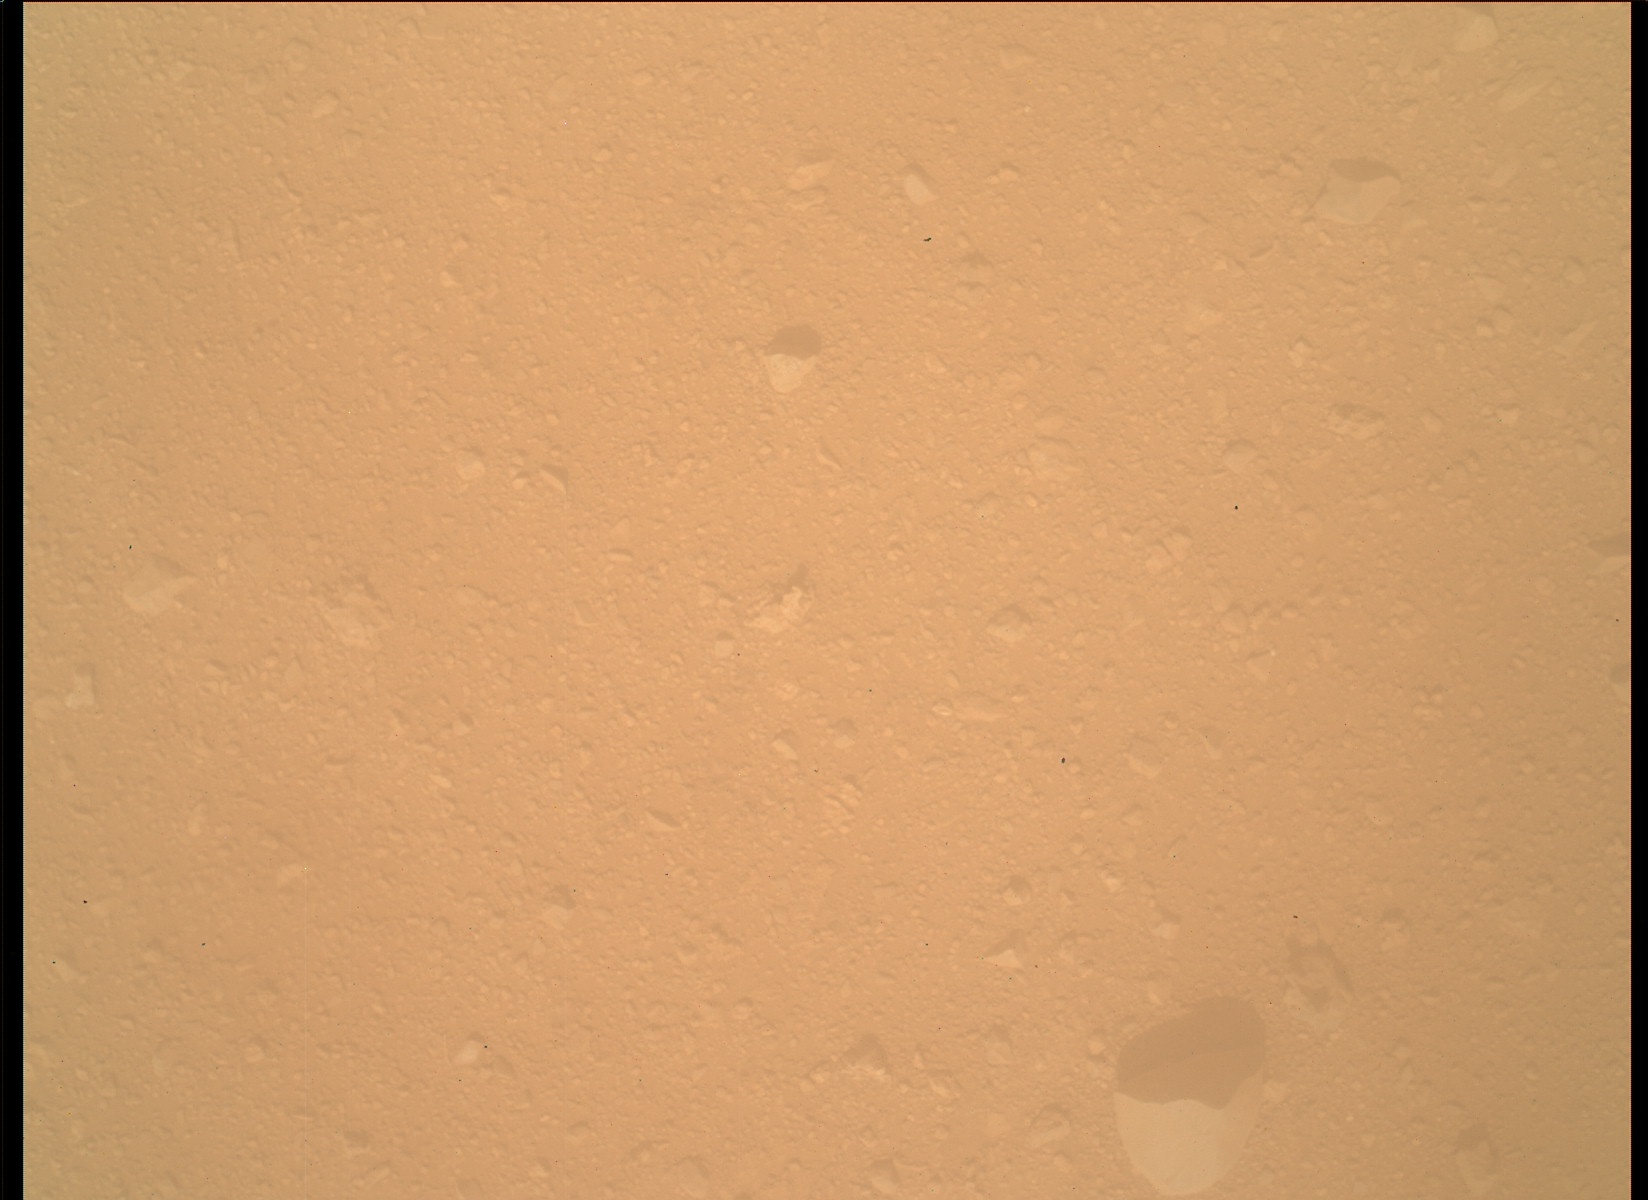 Nasa's Mars rover Curiosity acquired this image using its Mars Hand Lens Imager (MAHLI) on Sol 33